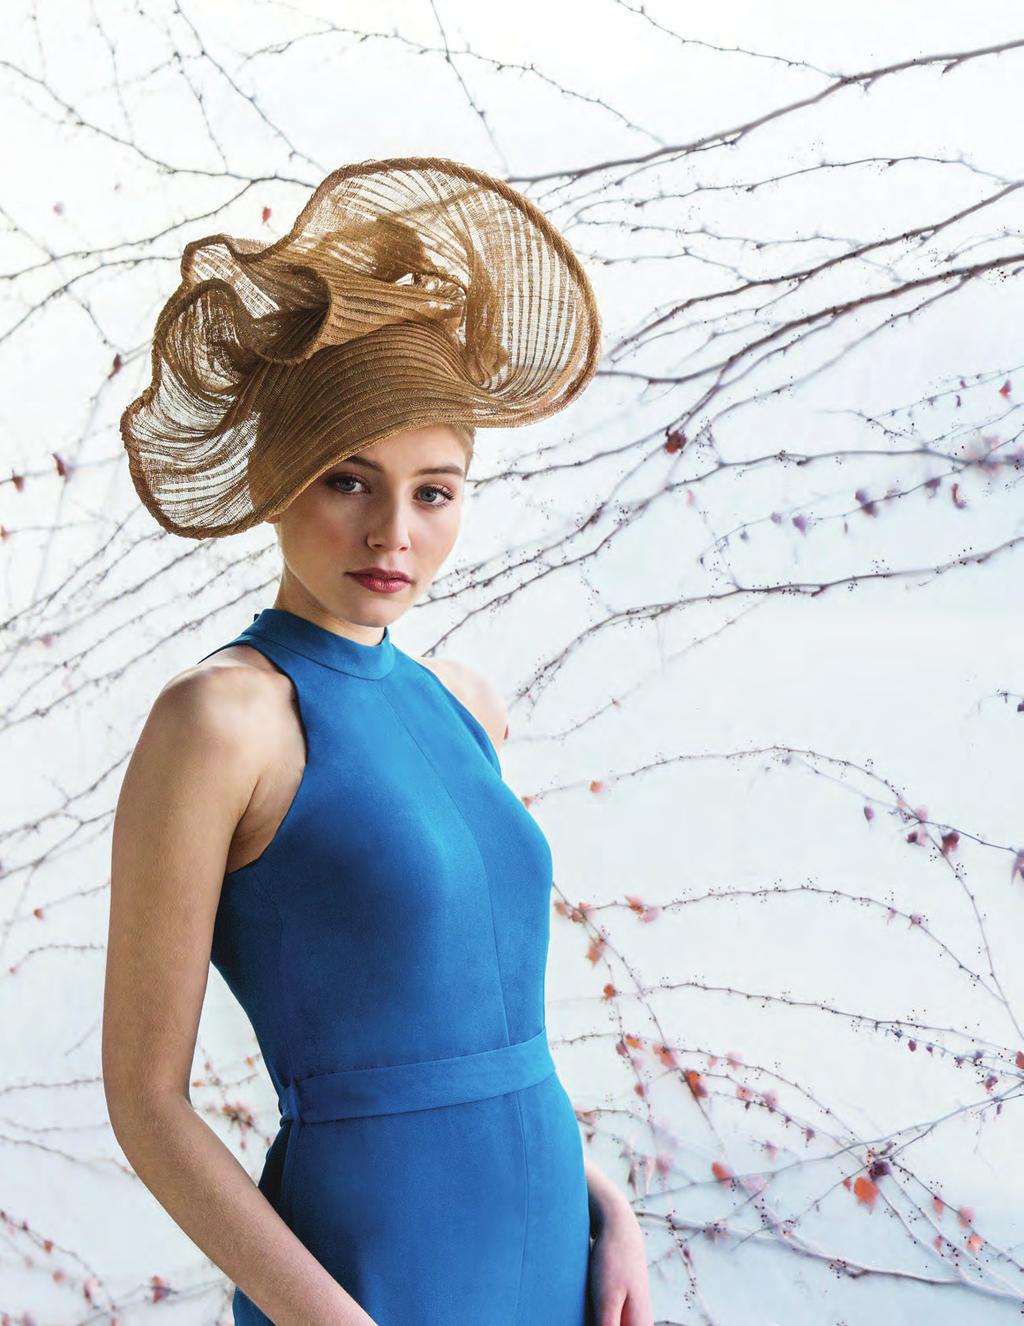 FASHION FABIENNE DELVIGNE S LUXURIOUS HATS Fabienne Delvigne has specialized since 1986 in the design and manufacturing of Haute Couture hats, jewellery, handbags and other fashion accessories.